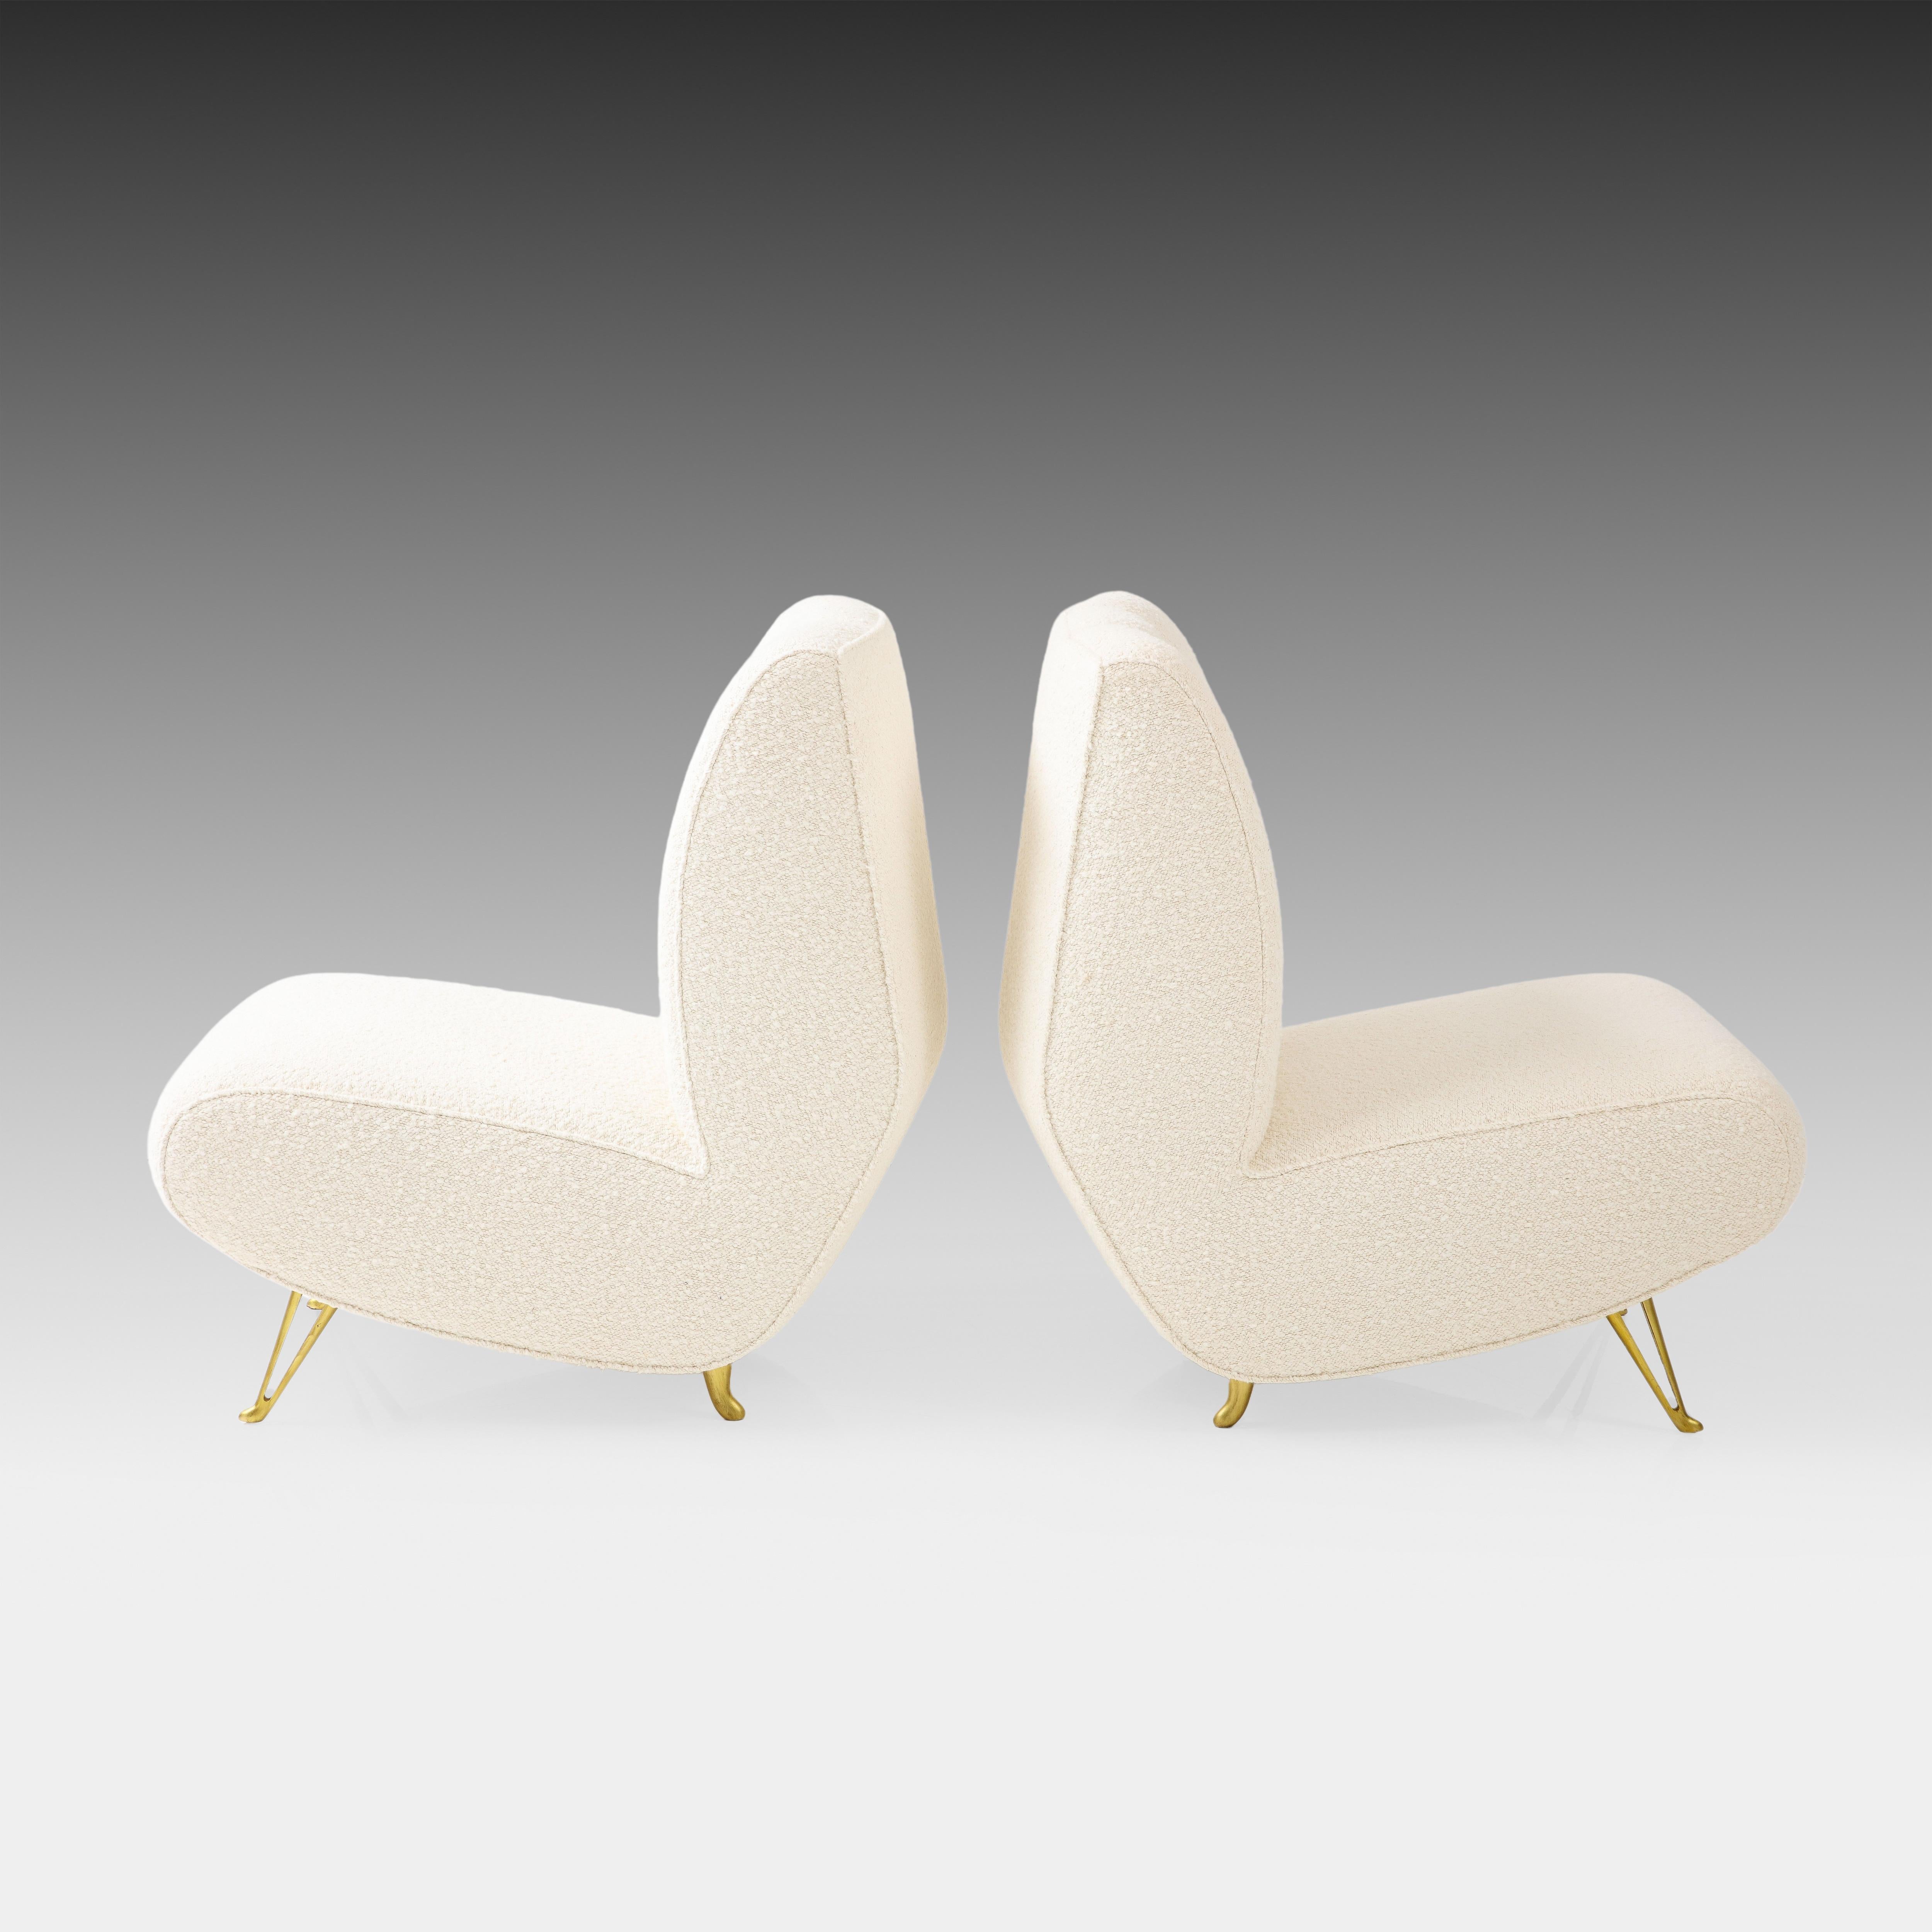 Italian ISA Bergamo Rare Pair of Lounge or Slipper Chairs in Ivory Bouclé, Italy, 1950s For Sale